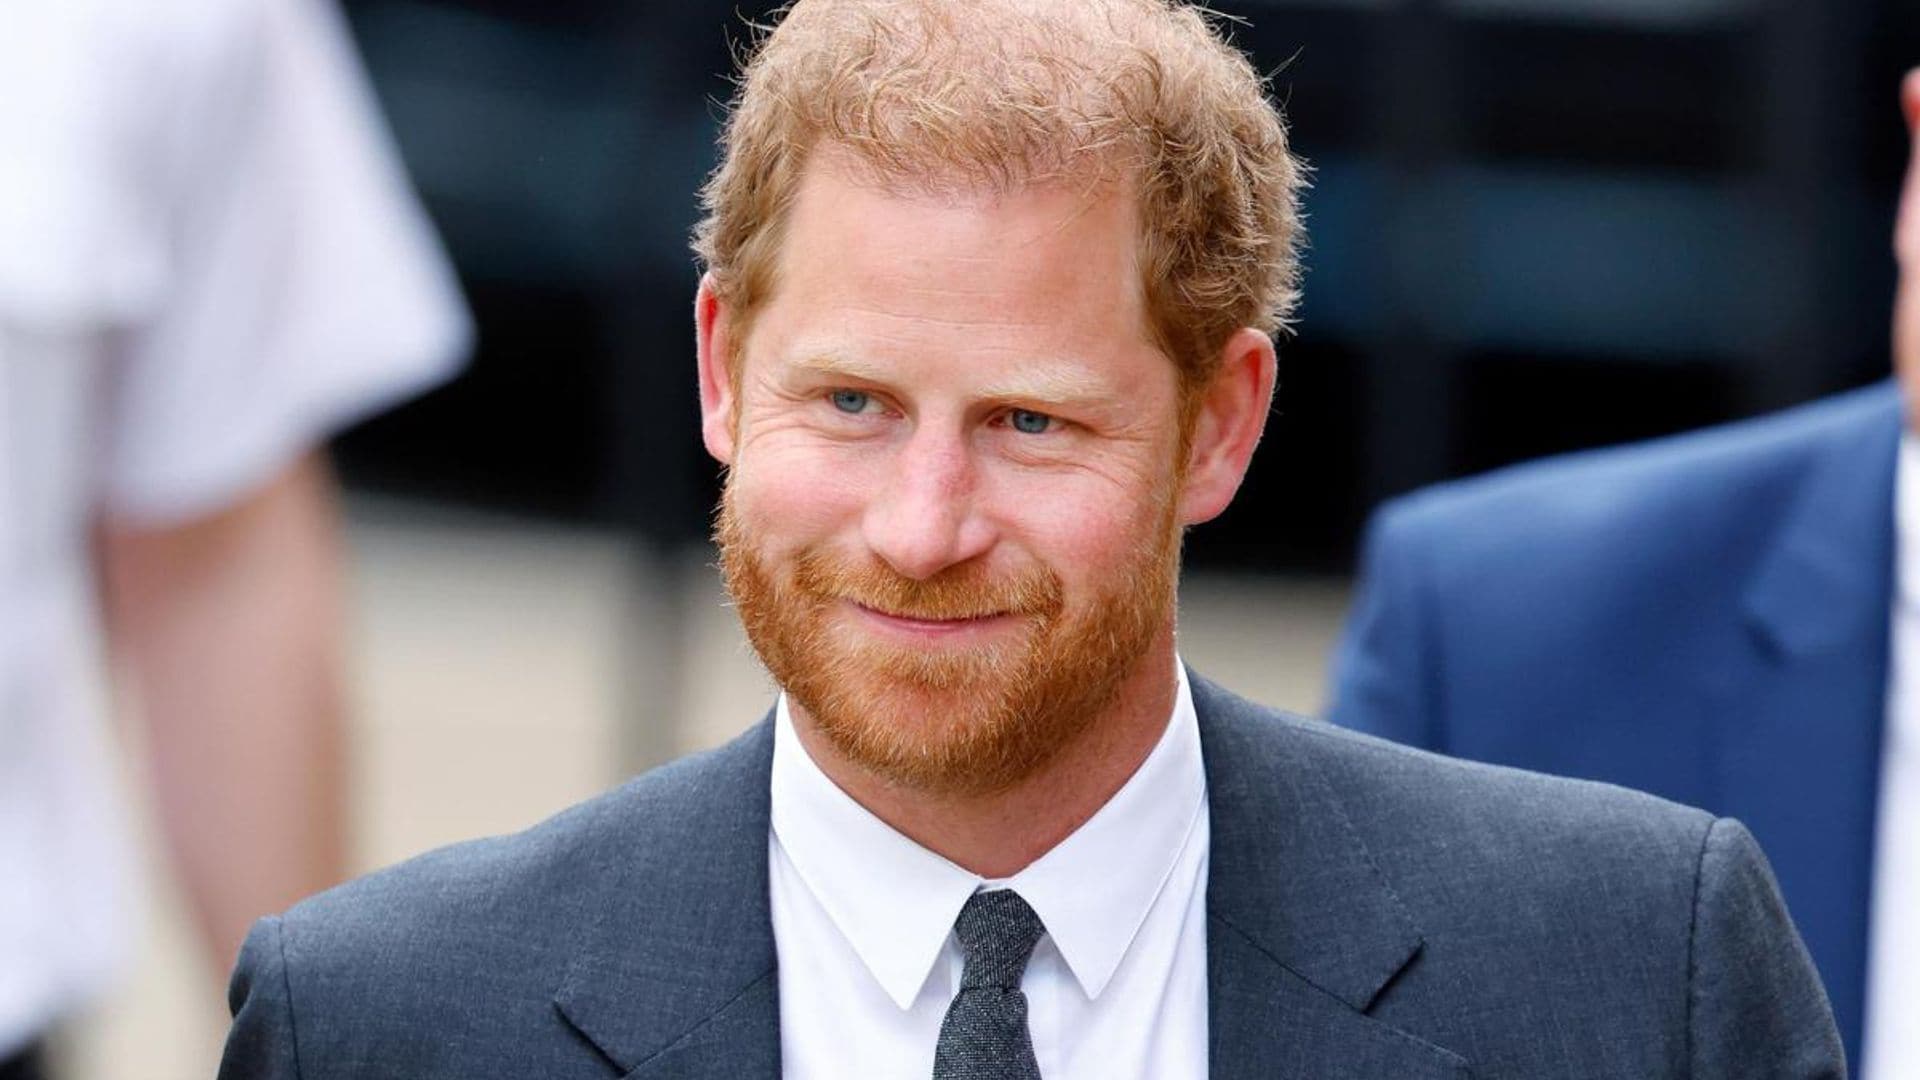 Prince Harry leaves London day after seeing dad King Charles